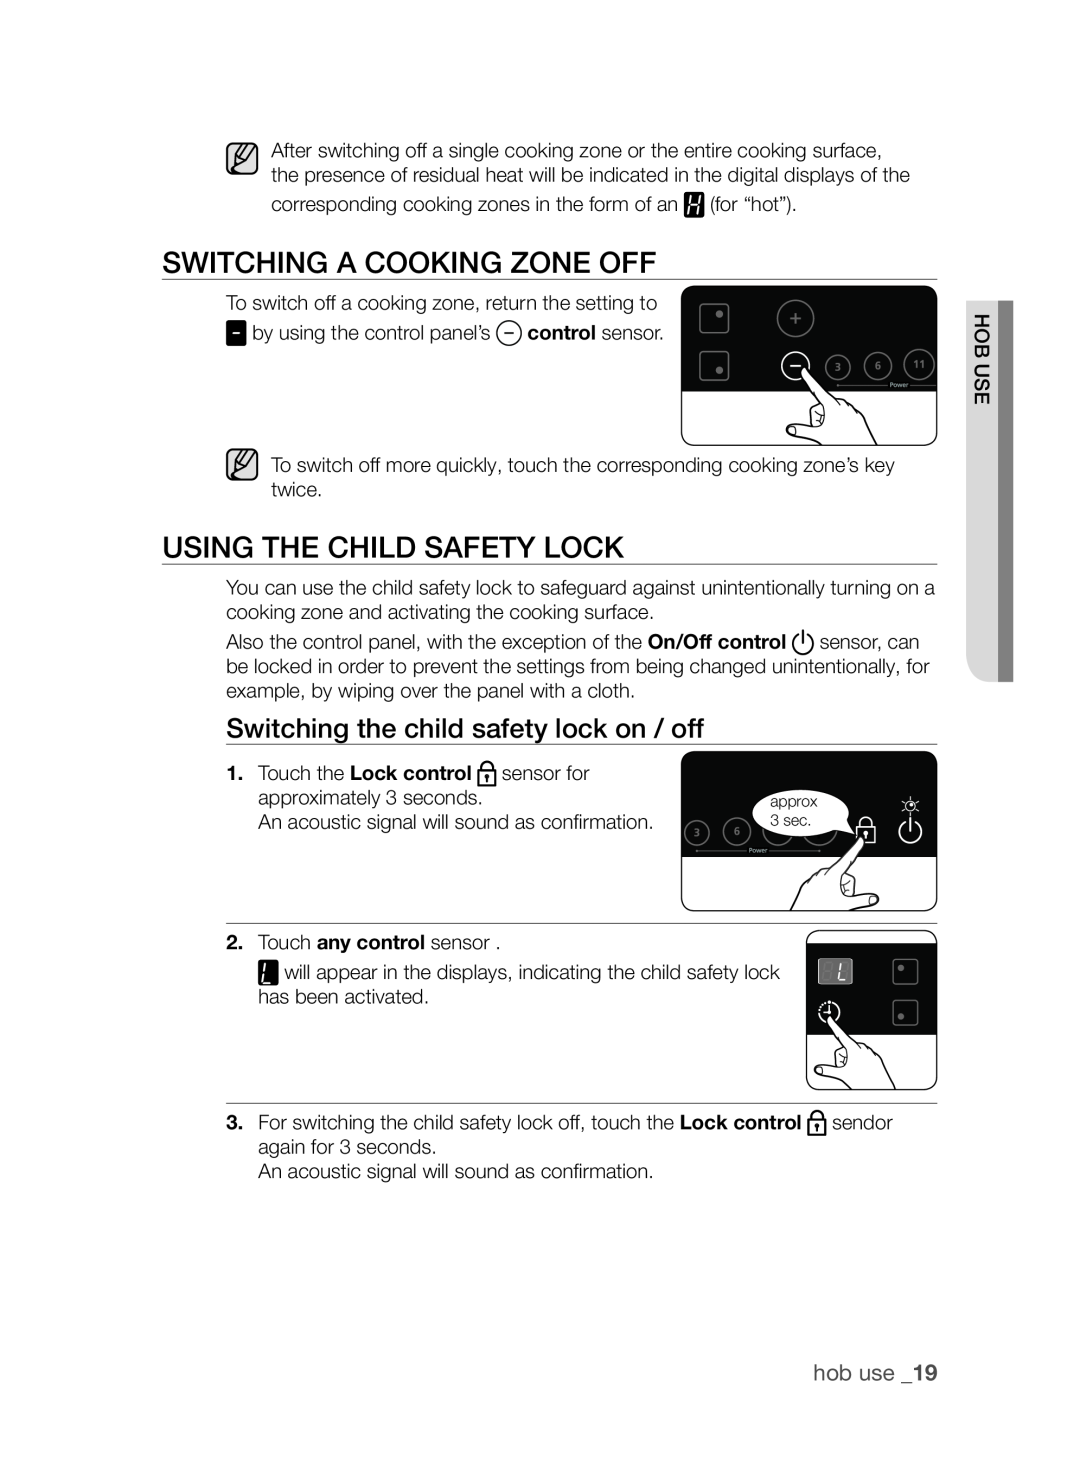 Samsung CTI613EH swITCHINg a CookINg zoNE off, usINg THE CHIlD safETy loCk, switching the child safety lock on / off 